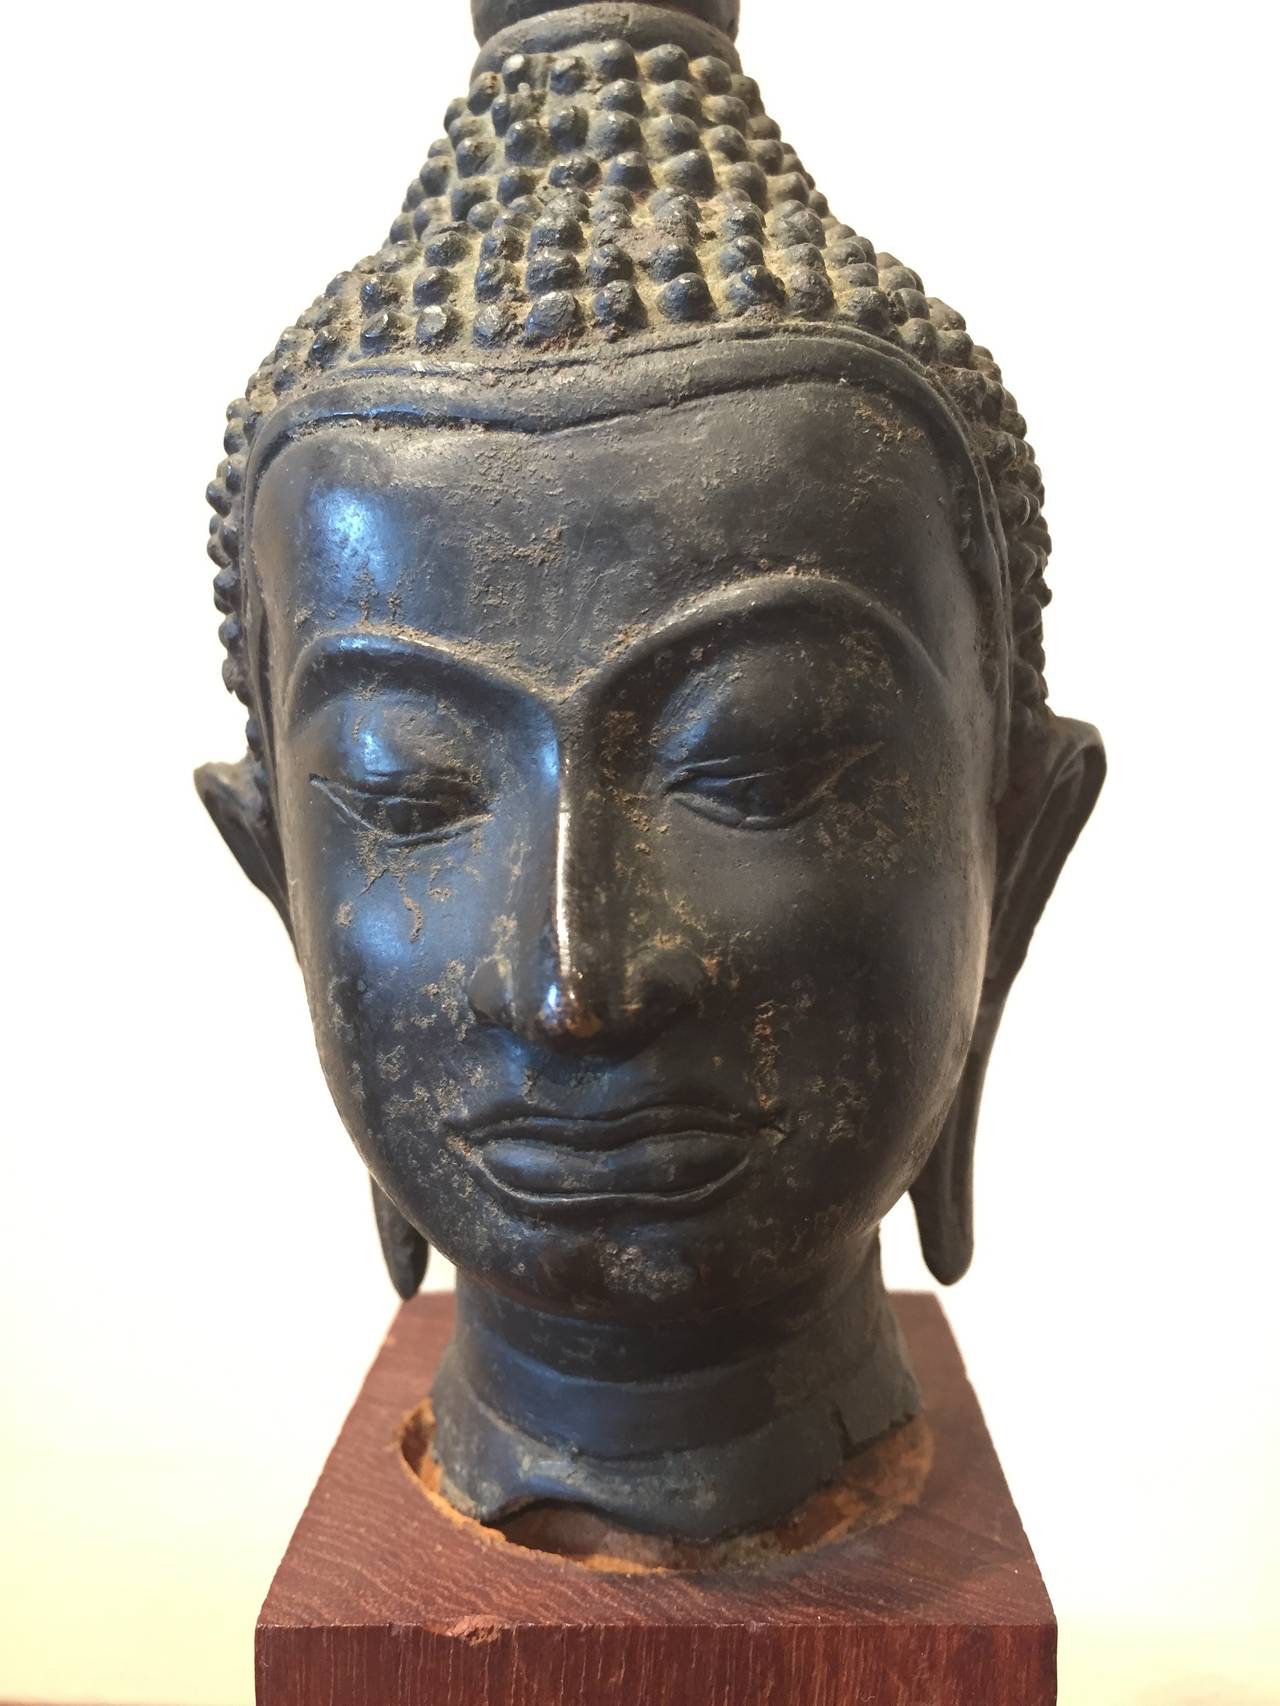 A classically shaped and simply mounted small bronze Buddha head from Thailand, c. 1920. Head lifts off base.
Measurements: 
Buddha: L: 3  D:3   H: 5
On Base: L: 2.25   D: 2.25   H: 8
BH2012